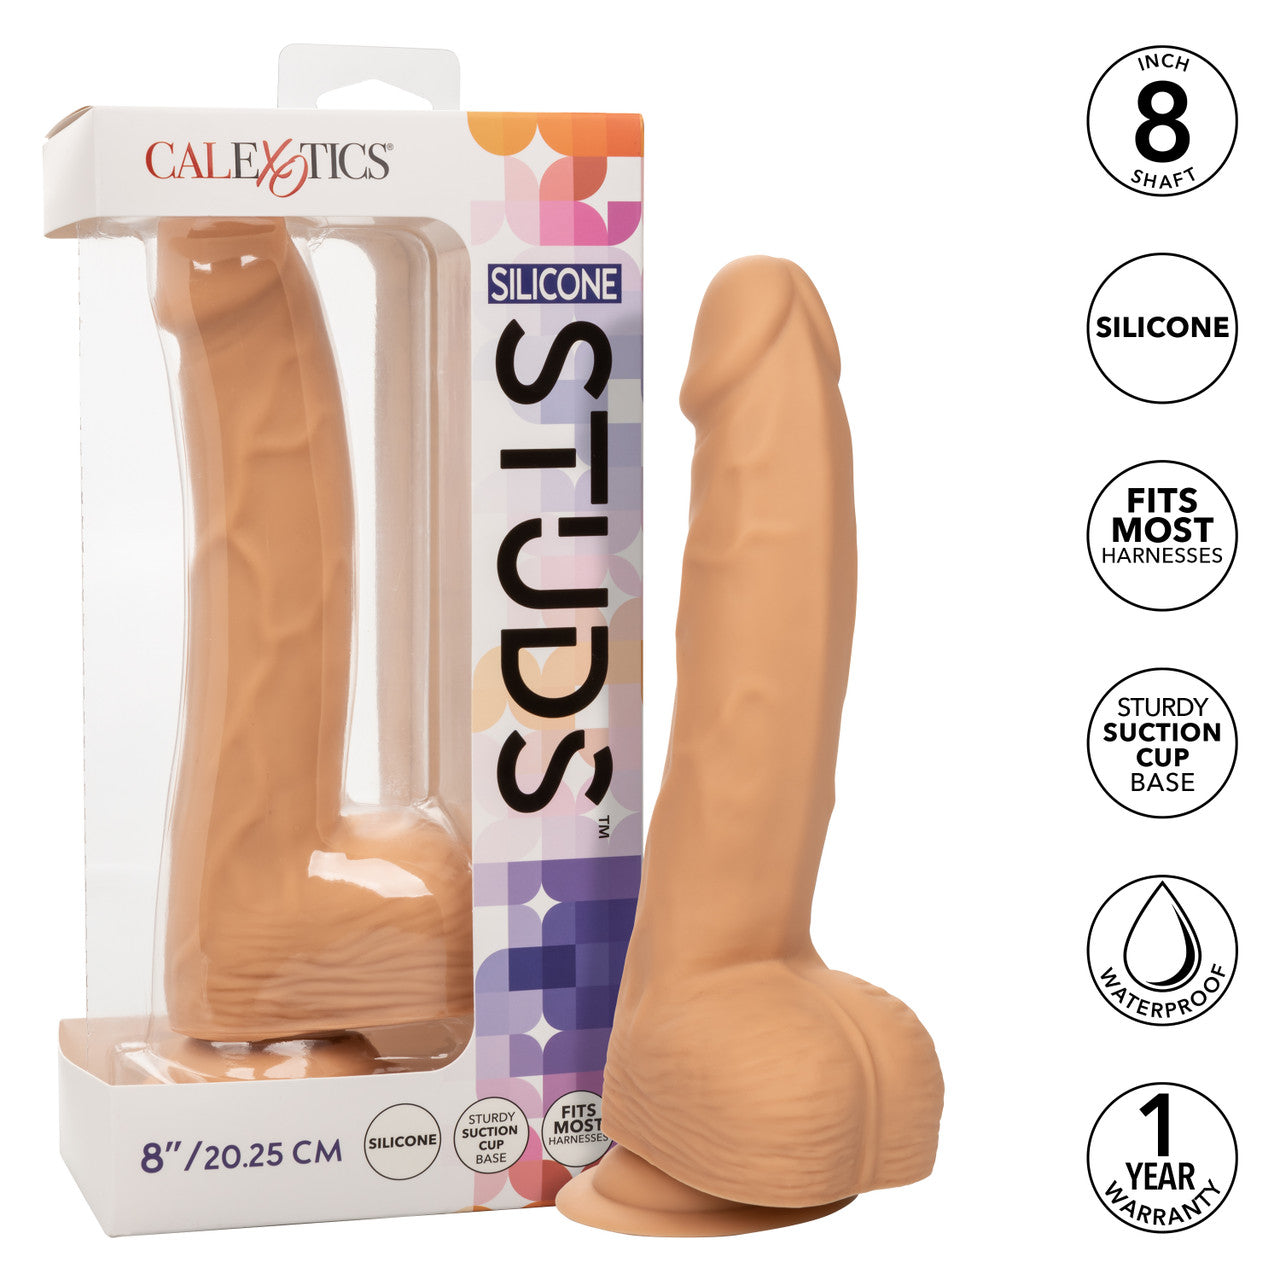 Silicone Studs Realistic Dildo - 8"/20.25 cm, Ivory - Thorn & Feather Sex Toy Canada